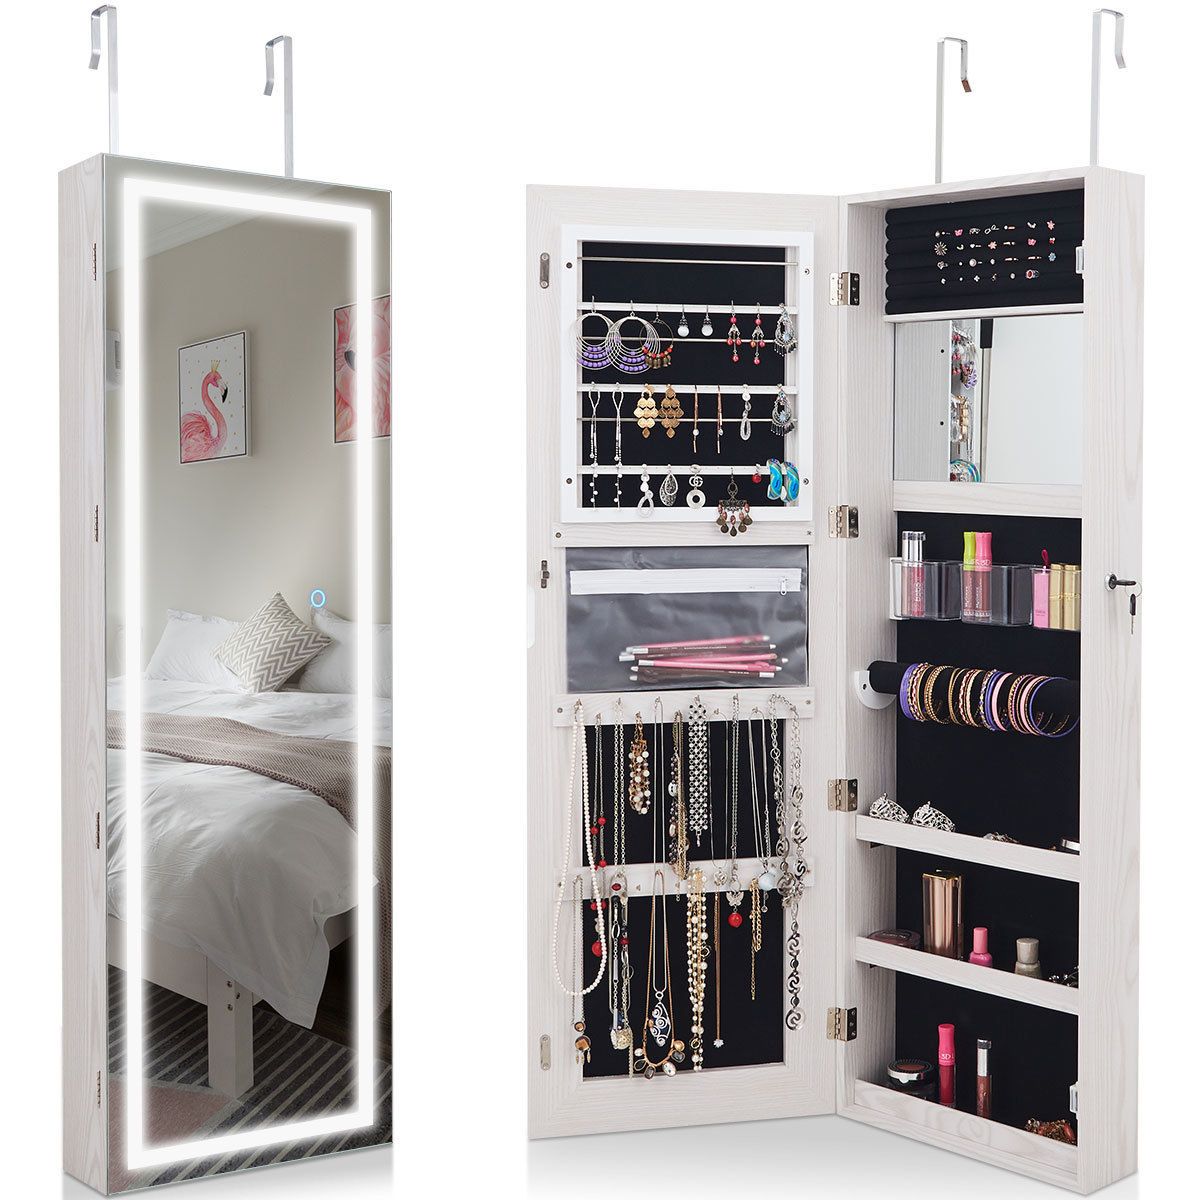 Costway Door Wall Mount Touch Screen Led Light Mirrored Jewelry Cabinet Pertaining To Hallas Wall Organizer Mirrors (View 12 of 15)